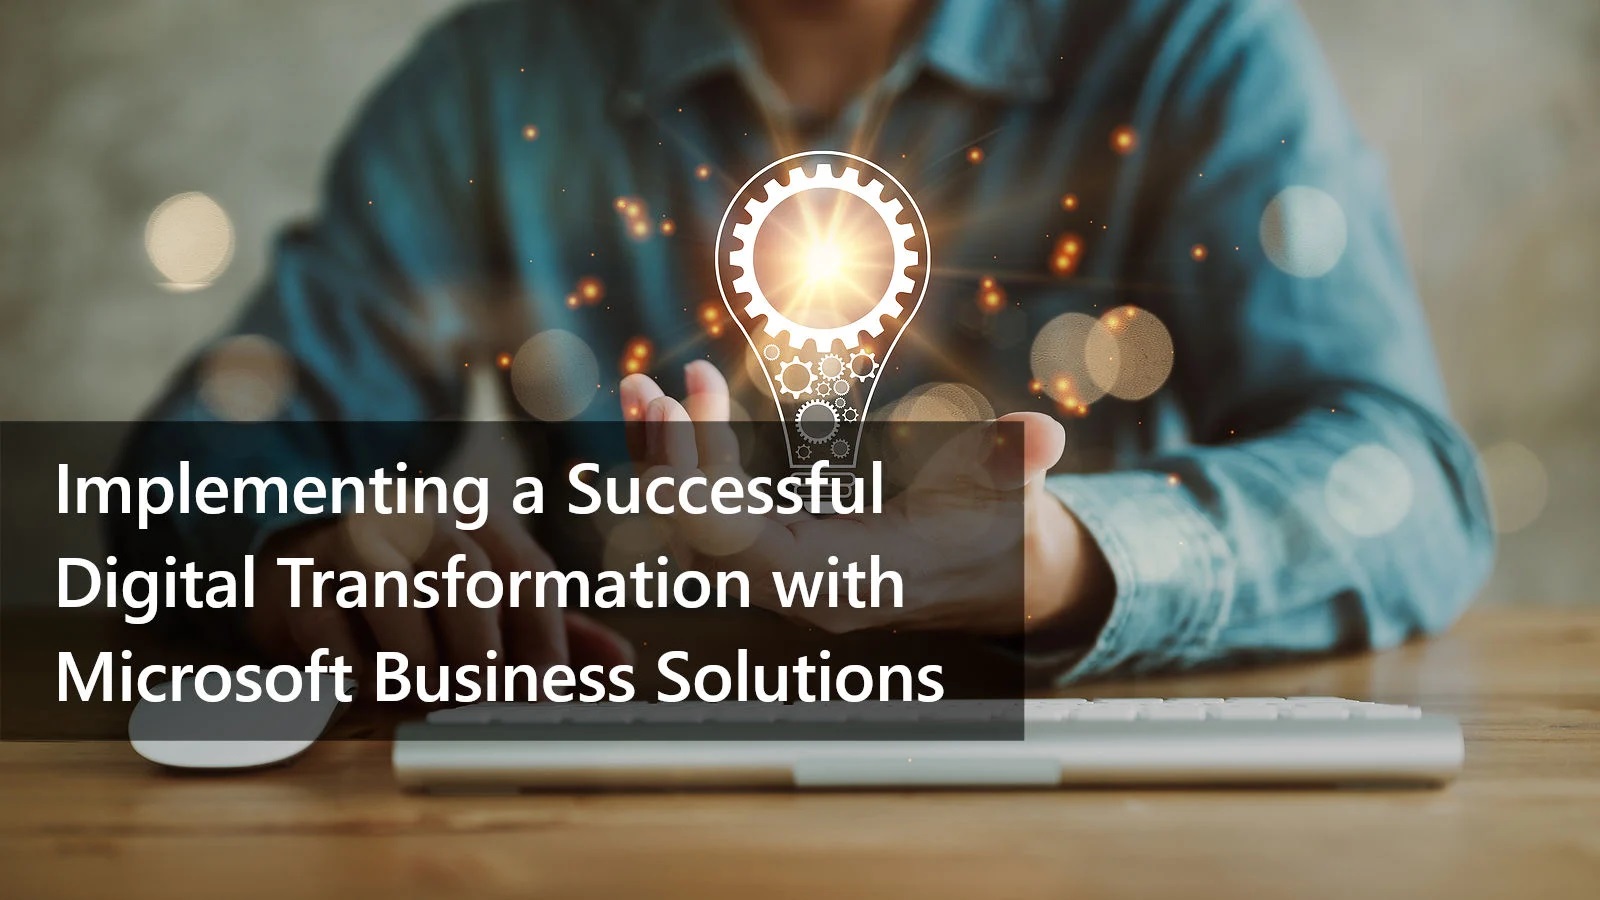 2022-01-w4-Implementing_a_Successful_Digital_Transformation_with_Microsoft_Business_Solutions-1